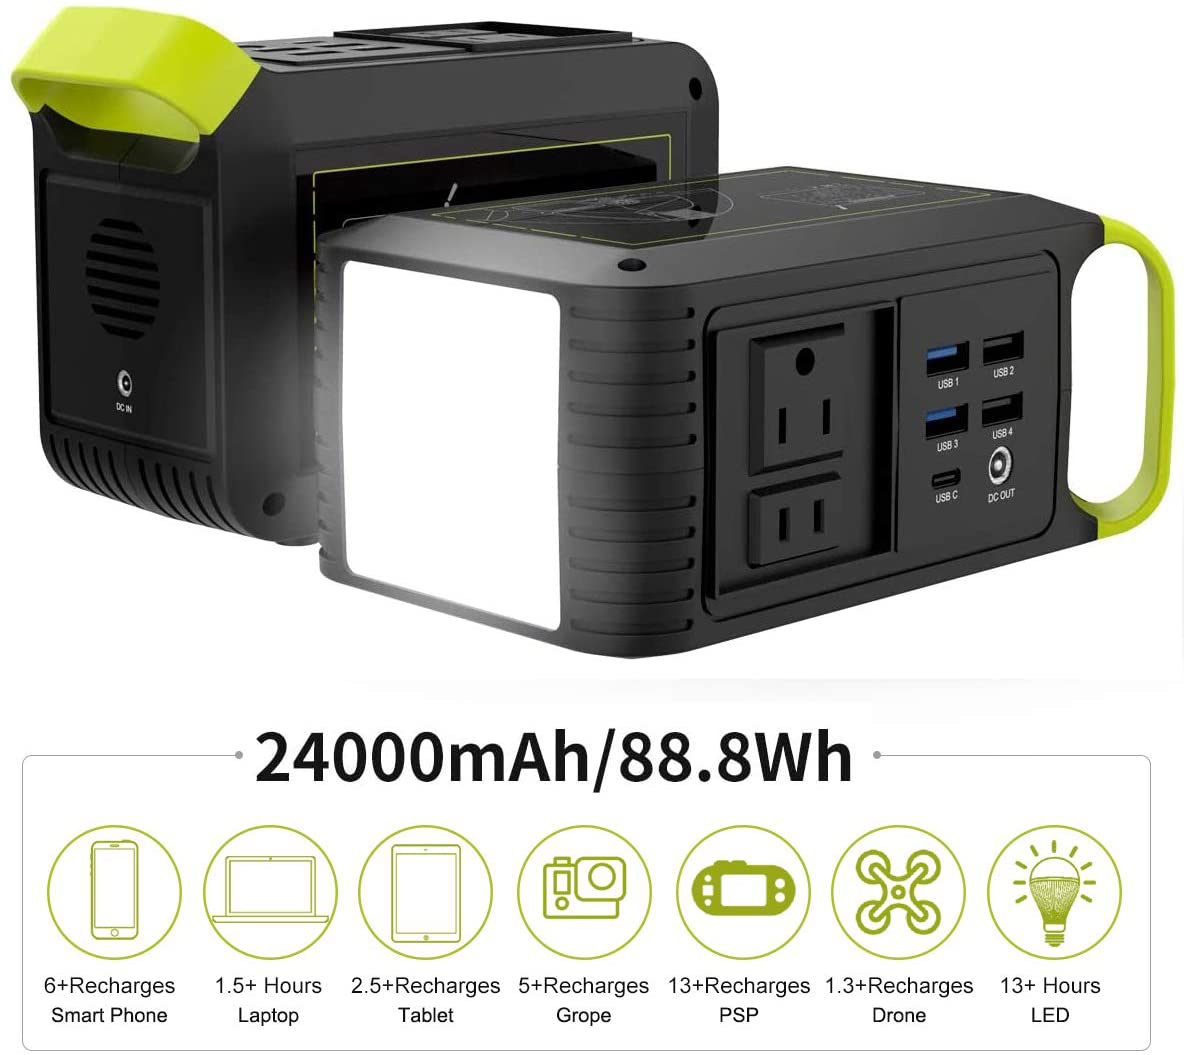 88Wh Portable Power Station, 24000mAh Camping Solar Generators Lithium Battery Power Supply with 110V/80W(Peak 120W) AC Outlet, USB QC3.0, LED Flashlights for CPAP Home Camping Emergency Backup